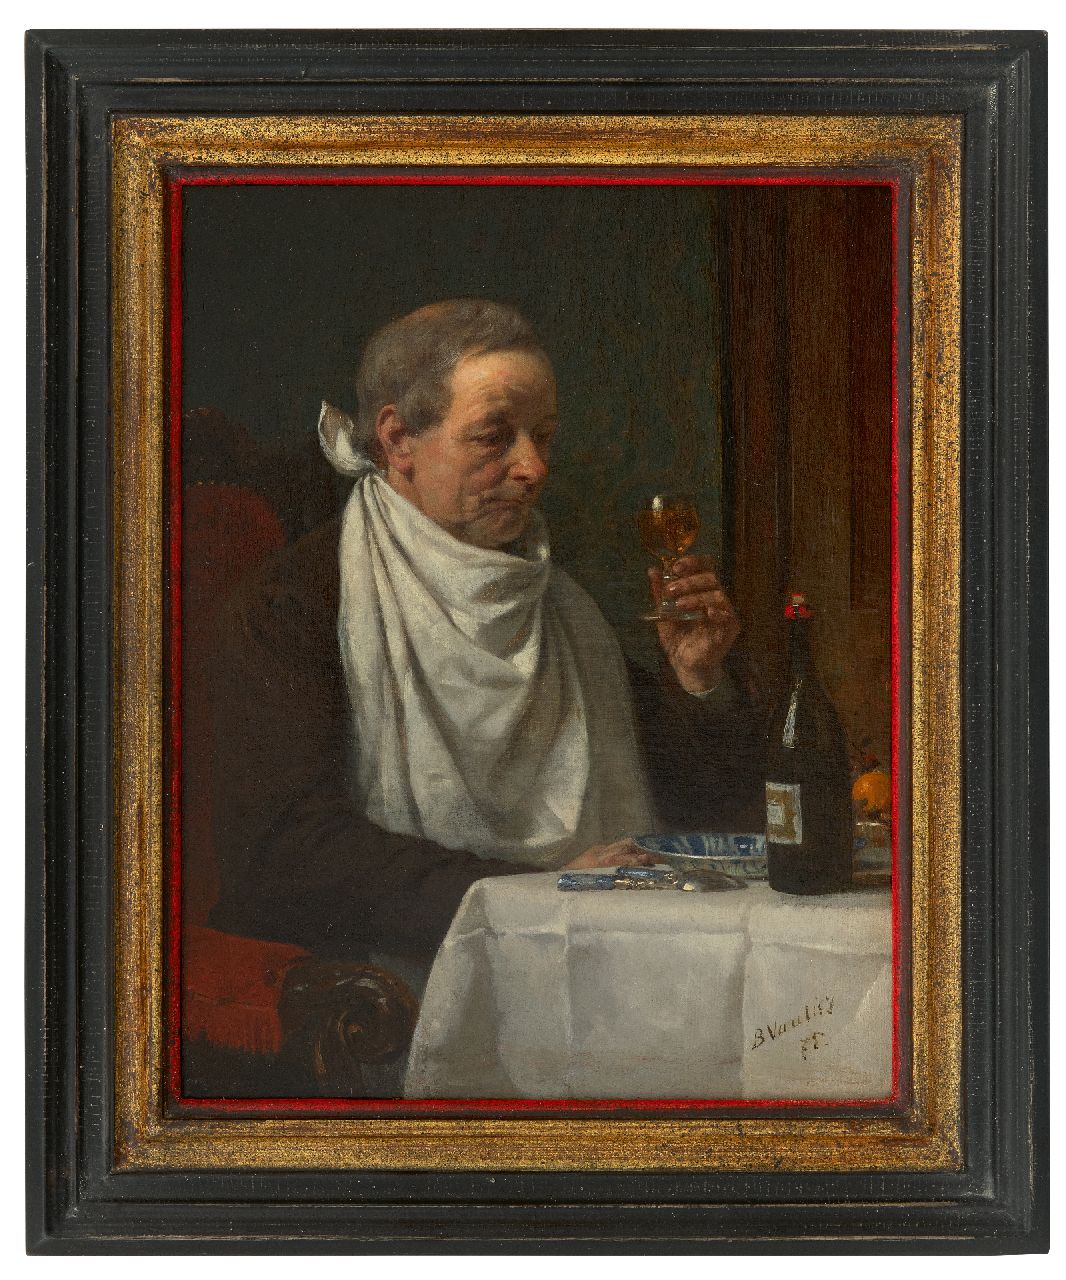 Vautier I M.L.B.  | Marc Louis 'Benjamin' Vautier I | Paintings offered for sale | The Epicurean, oil on canvas 35.2 x 27.6 cm, signed l.r. and dated '75